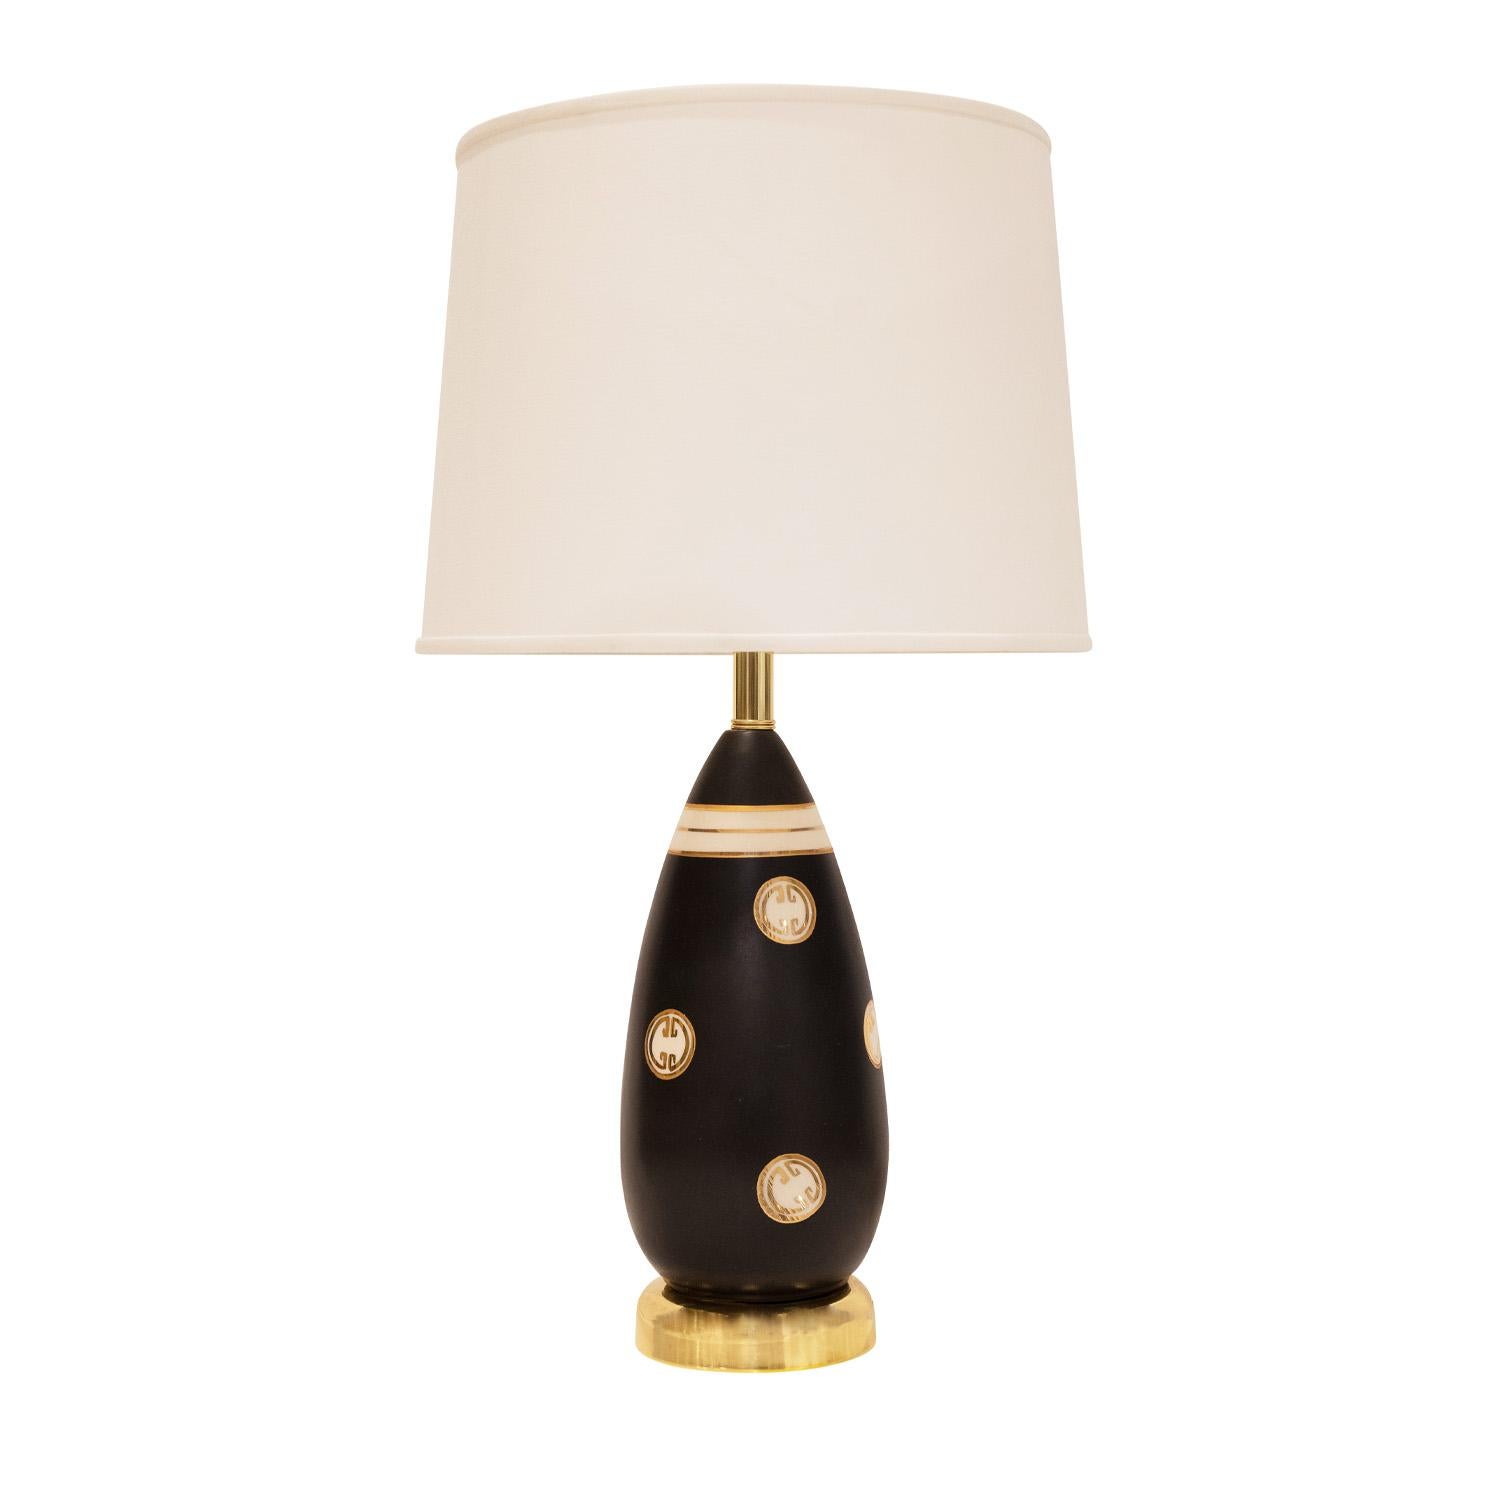 Studio made porcelain table lamp with hand painted gold medallions with brass base attributed to Zaccagnini, Italy, 1960's. The brass has been completely restored (polished and lacquered) and it has been rewired with a new socket. It’s really a